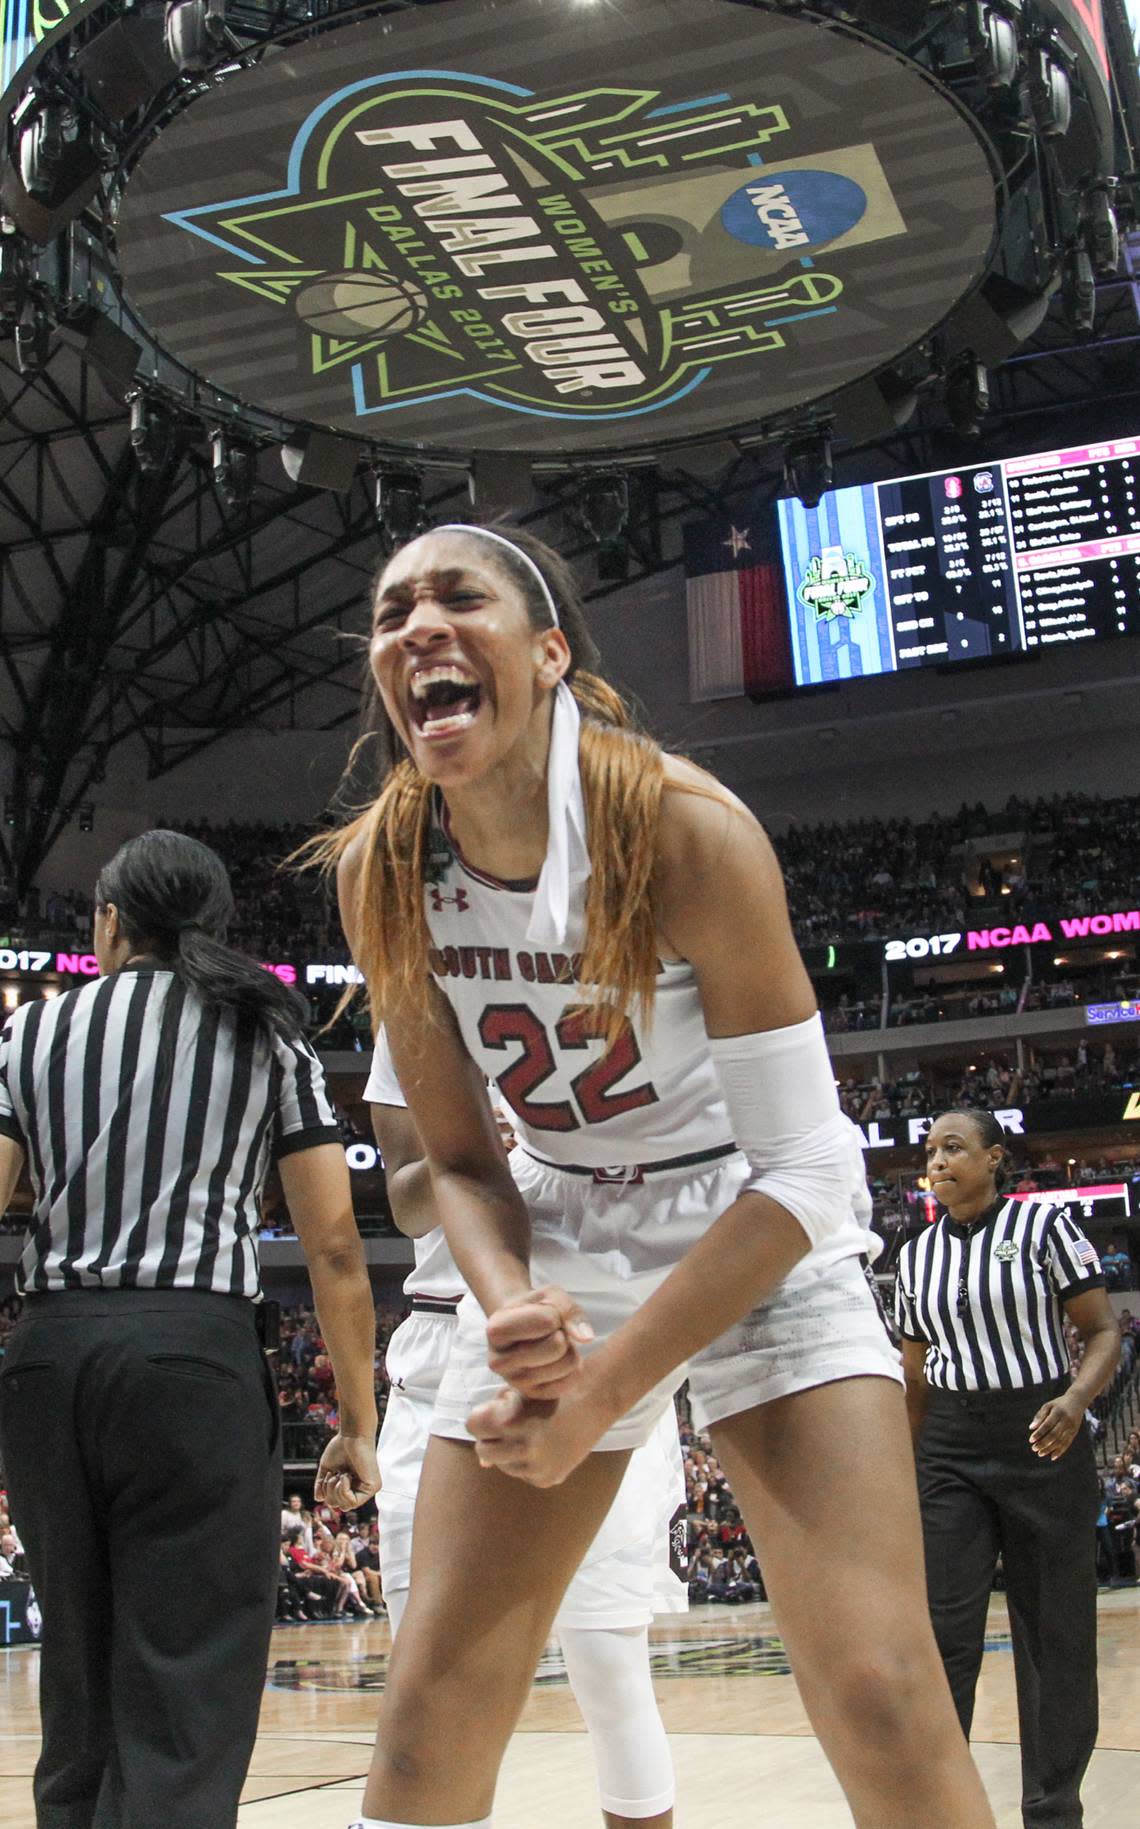 South Carolina’s A’ja Wilson (22) celebrates during the Final Four game in 2017 against Stanford at the American Airlines Arena in Dallas. The Gamecocks went on to win the national championship.